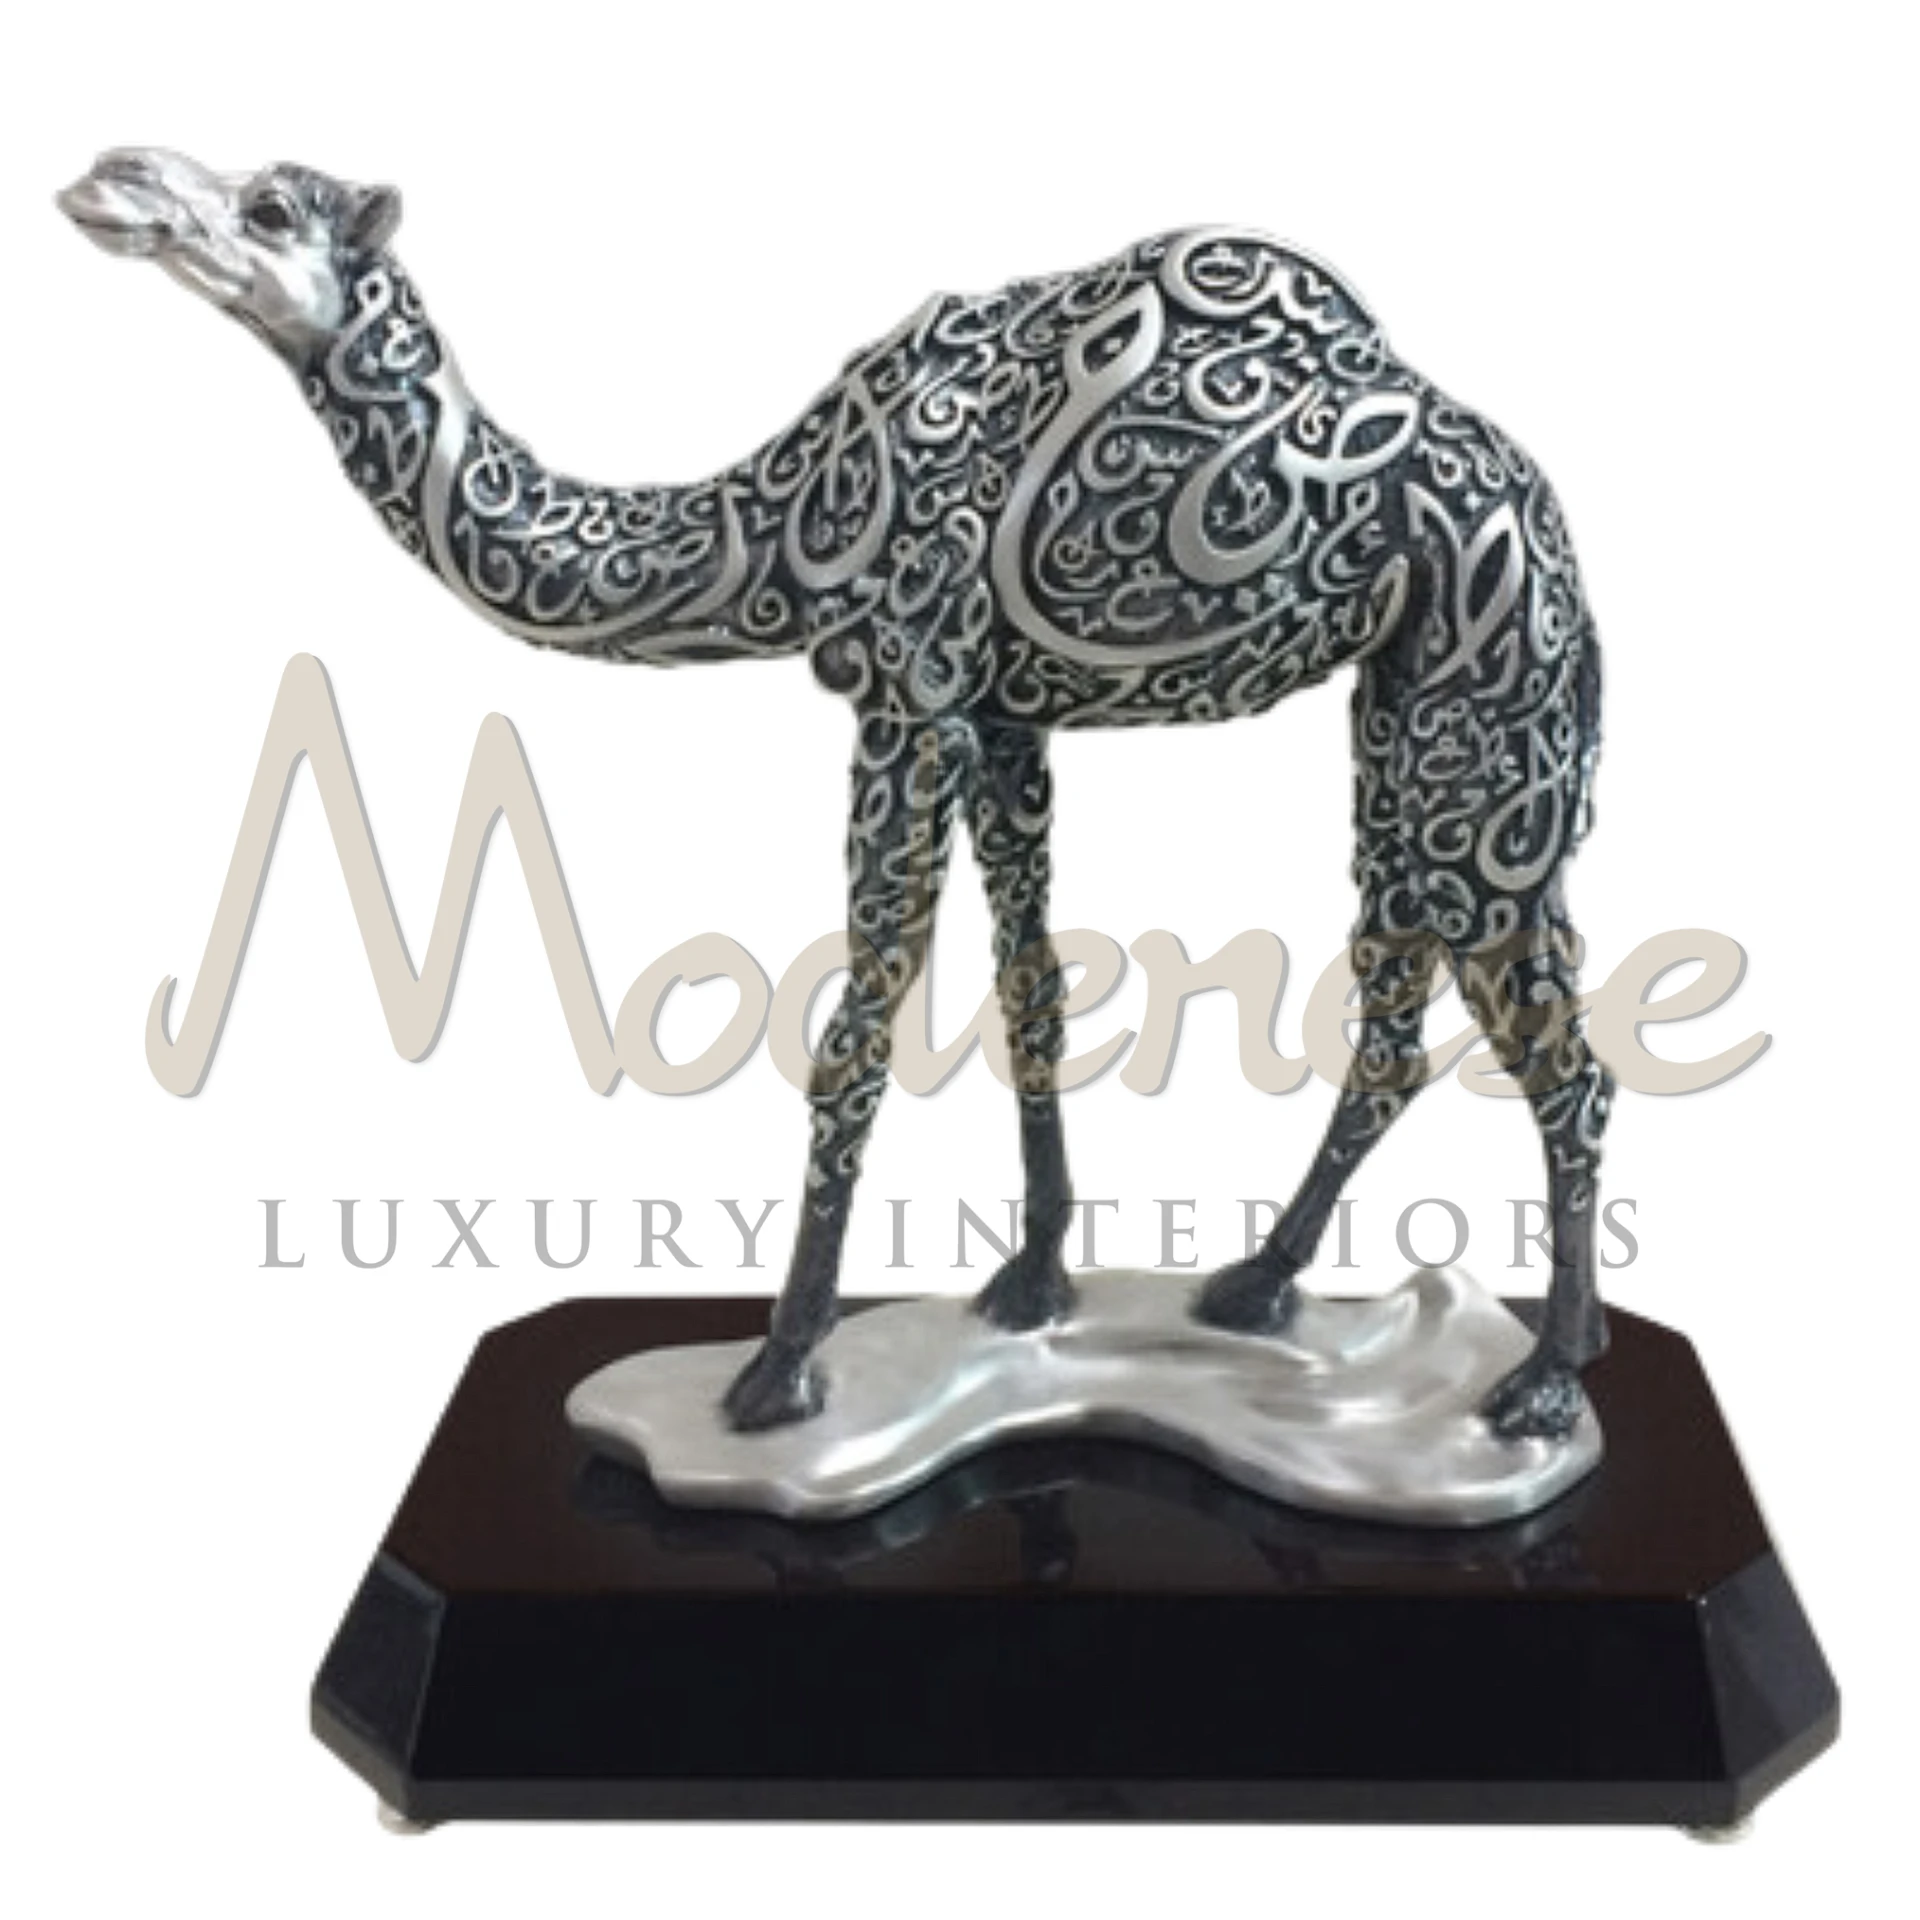 Classical Silver Camel statuette, a timeless piece of decor, enhancing any interior with its elegance and homage to the natural world's diversity.